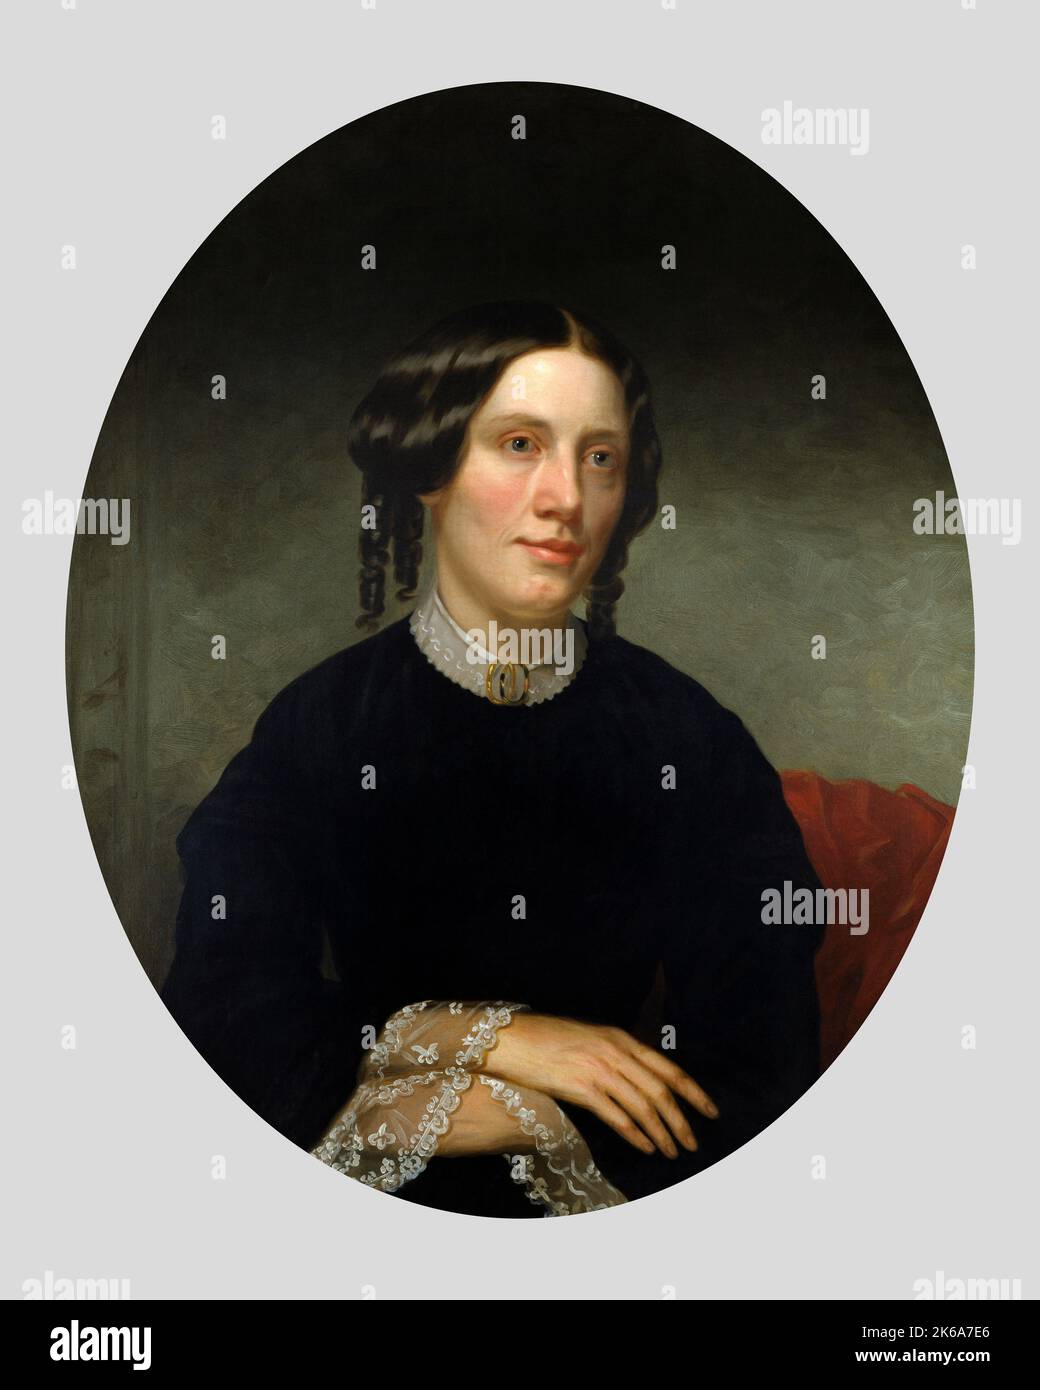 19th century portrait of Harriet Beecher Stowe, a renowned American writer. Stock Photo